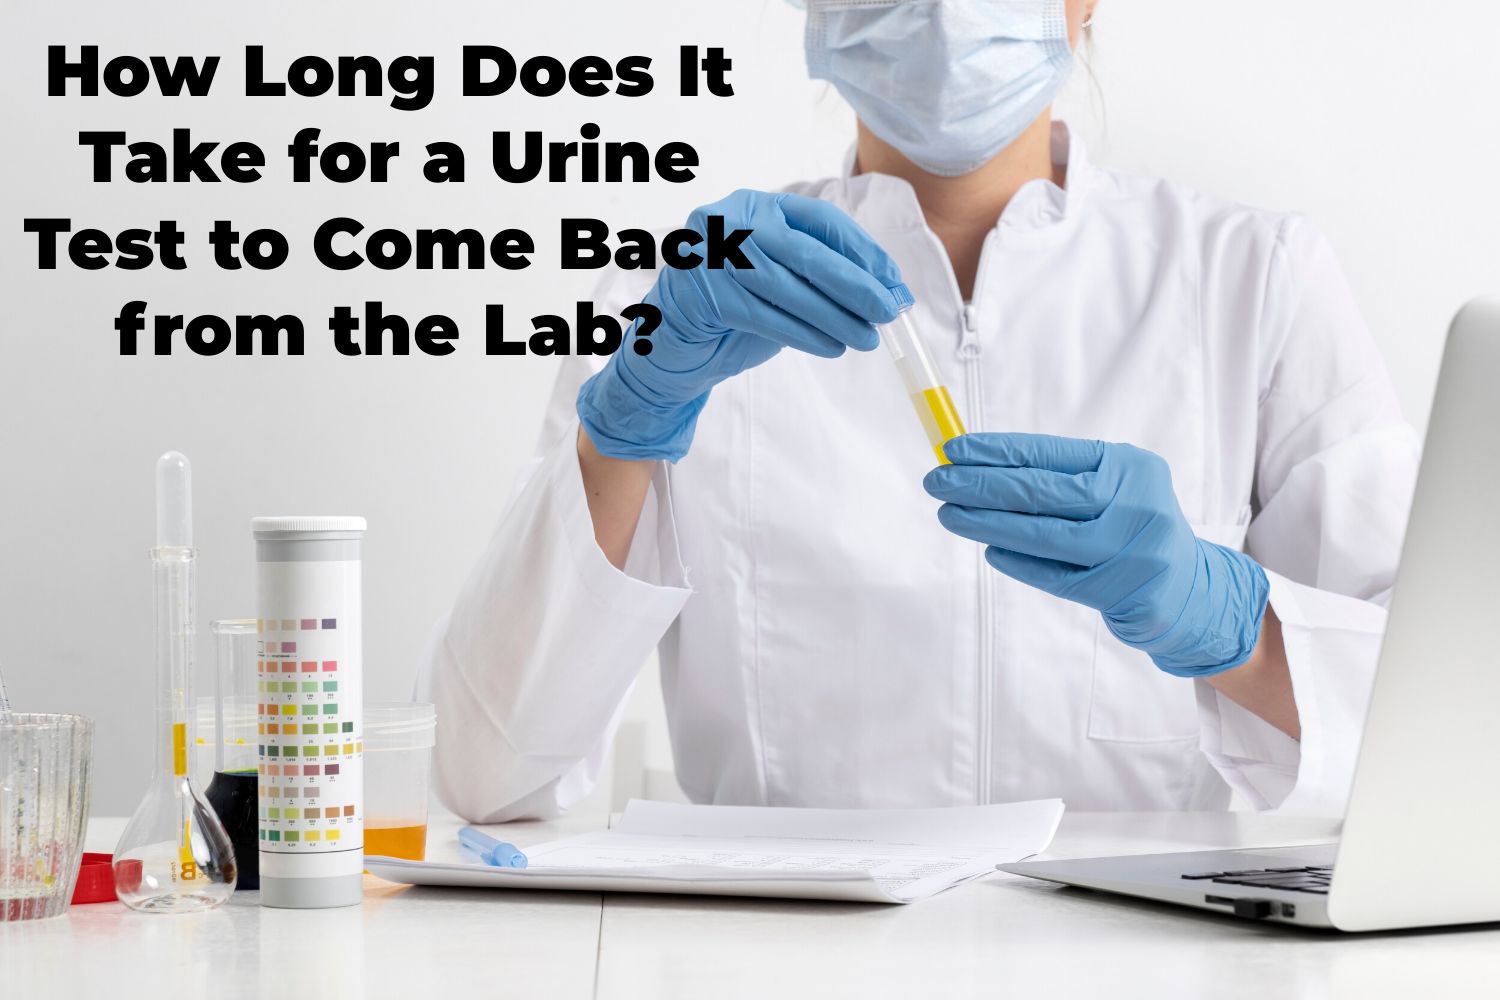 How Long Does It Take for a Urine Test to Come Back from the Lab